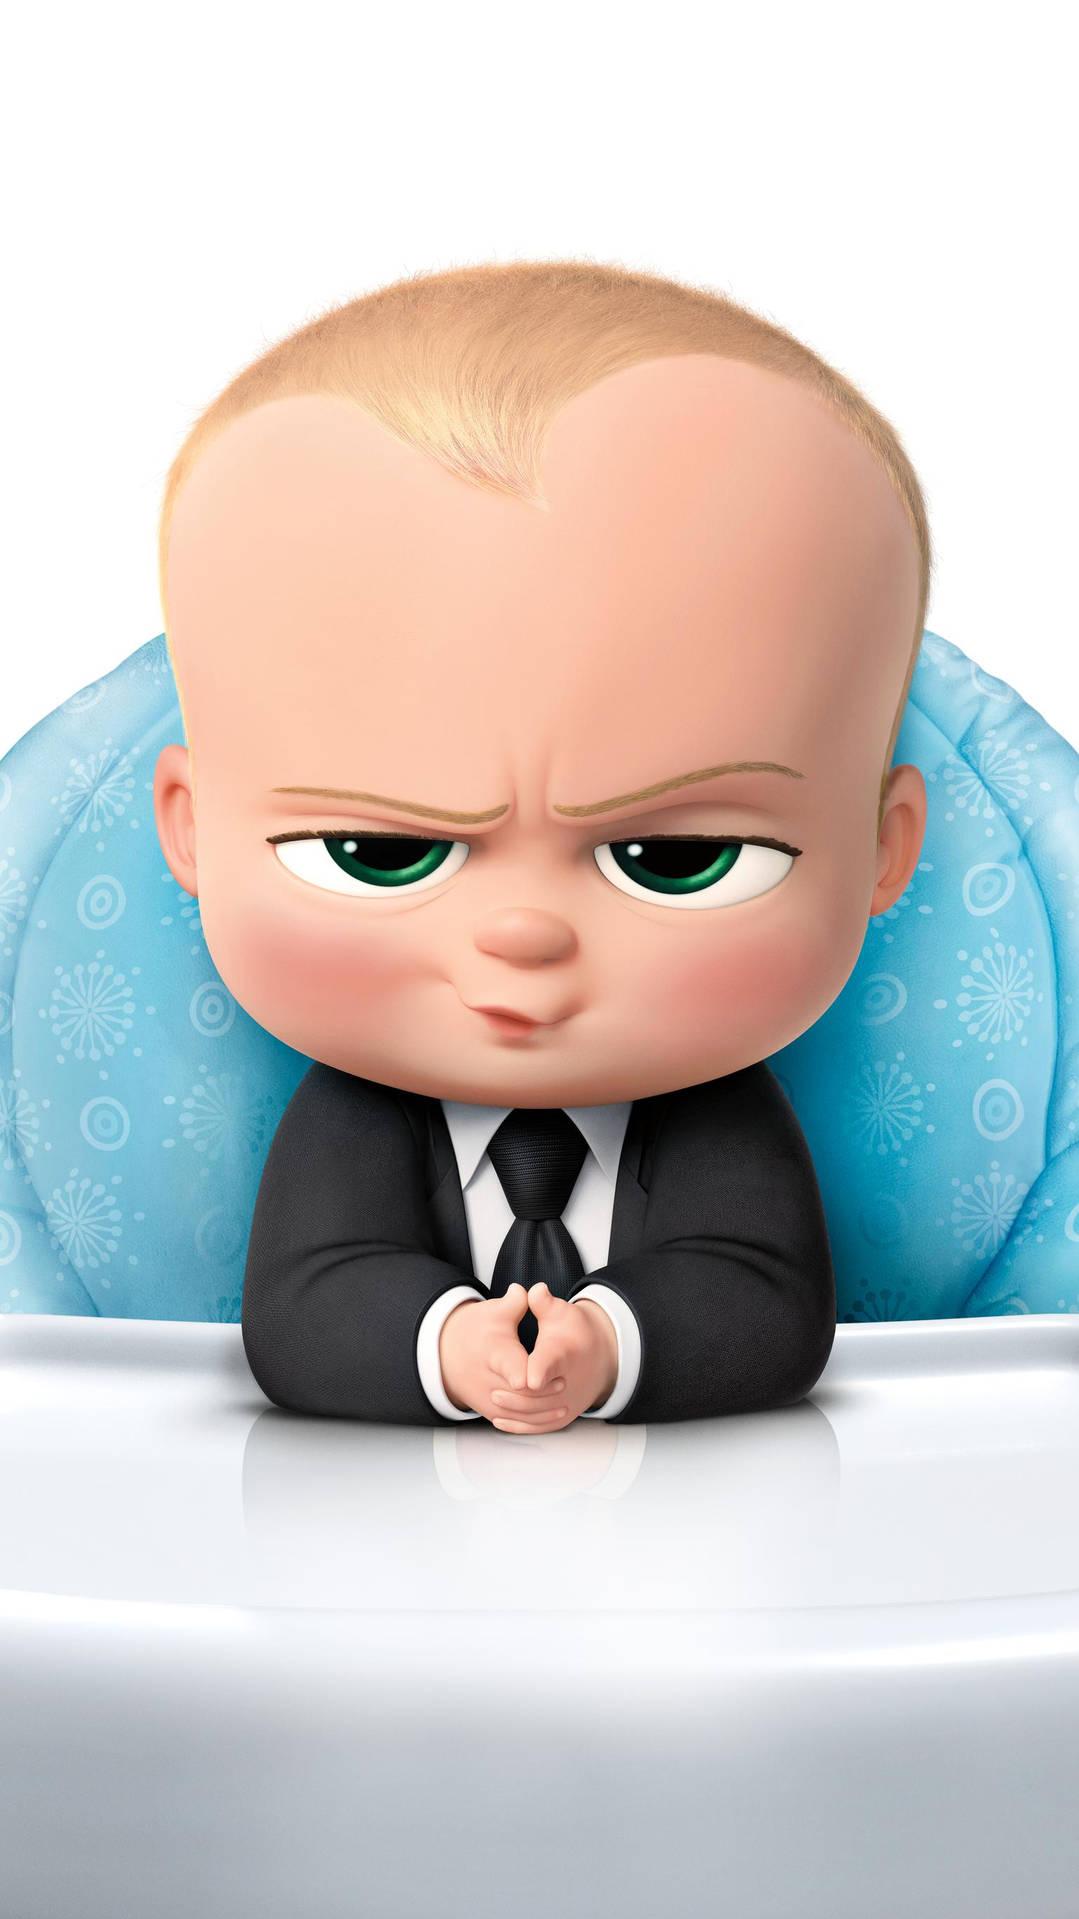 Download The Boss Baby In Serious Face Wallpaper